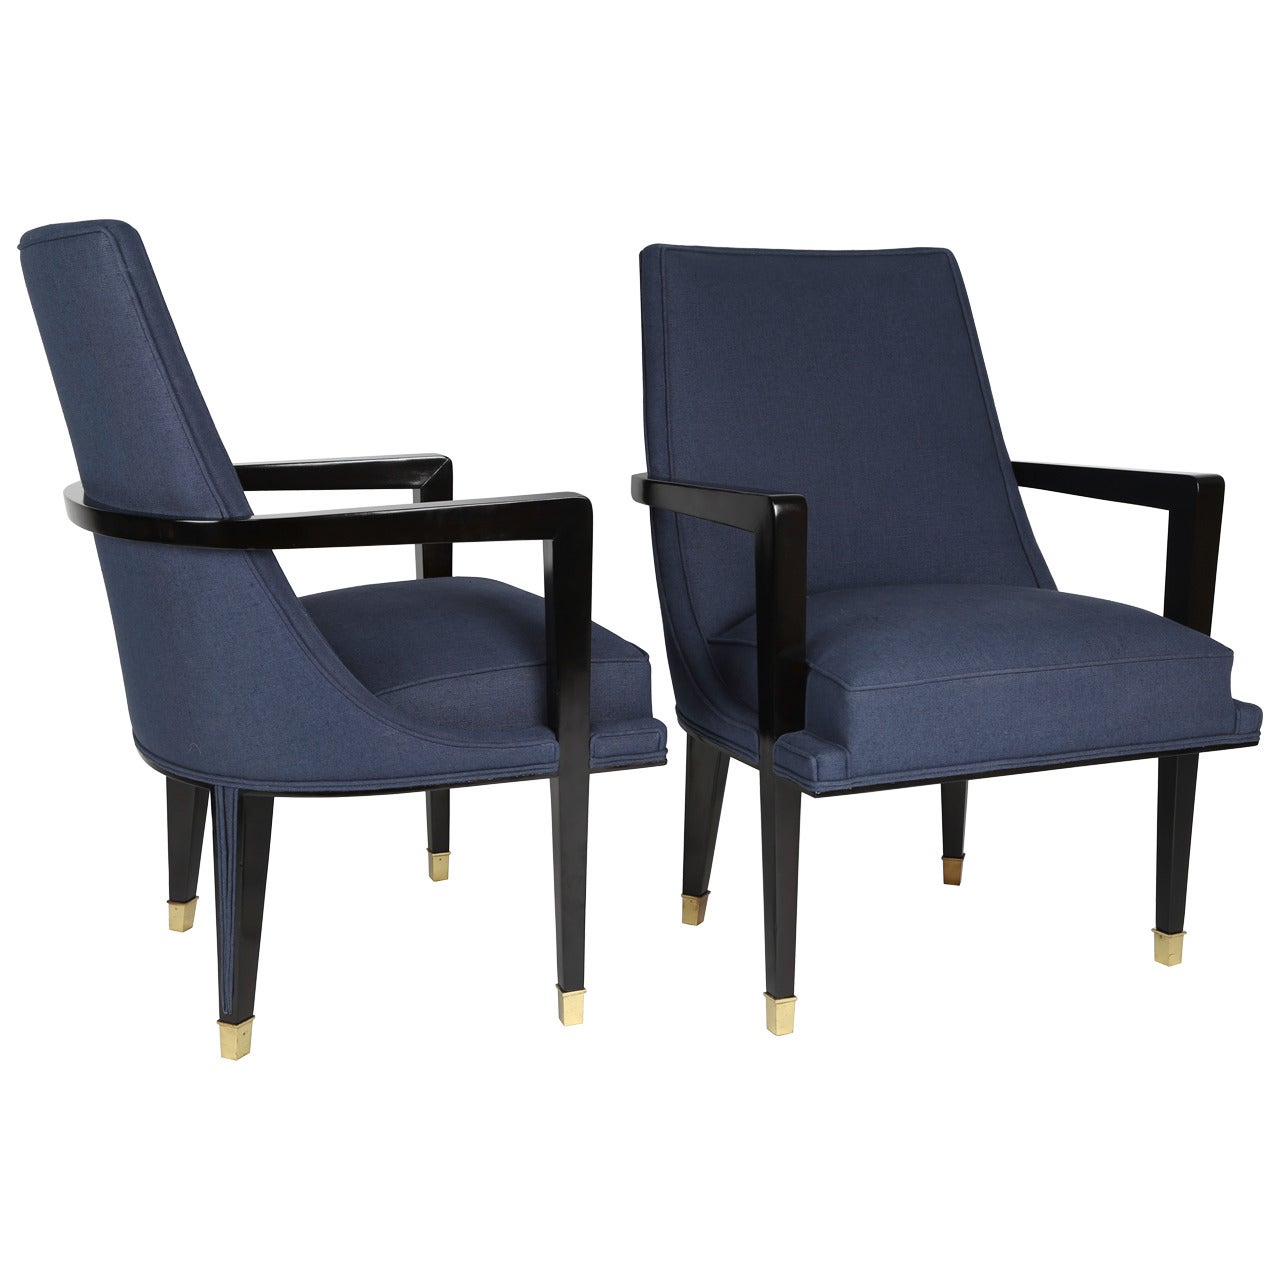 Pair of Ebonized Wood and Brass Armchairs by Roberto and Mito Block, circa 1950s For Sale